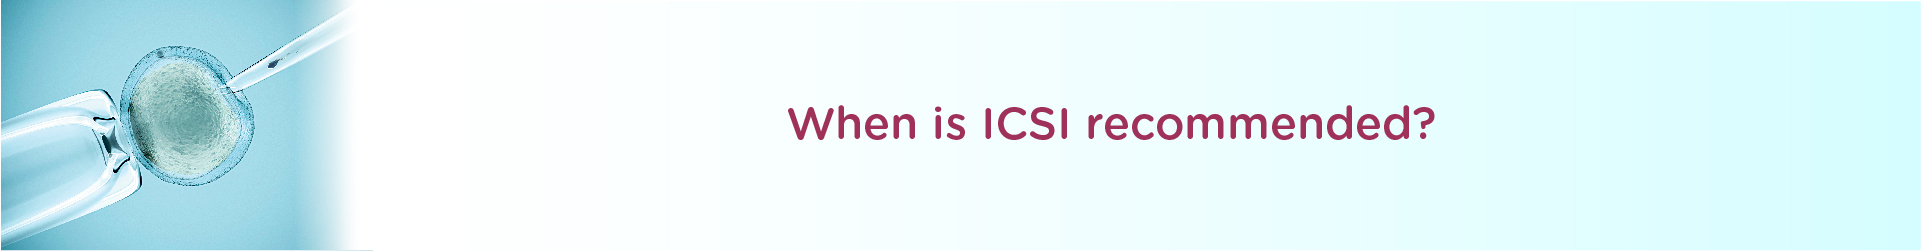 What are the Common Reasons for Doing ICSI?